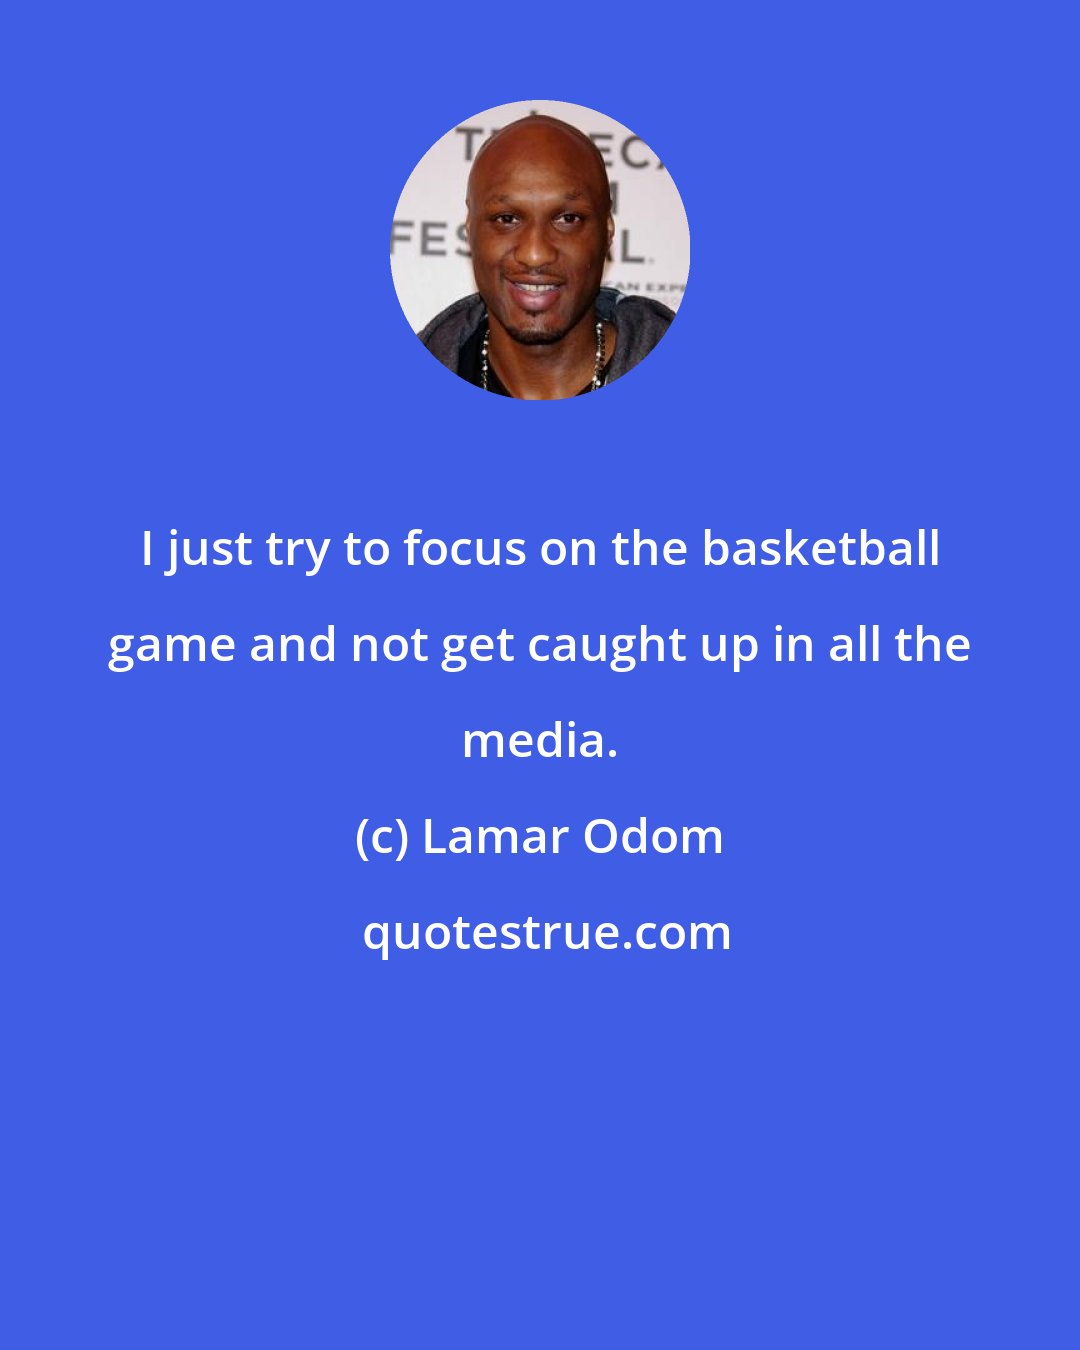 Lamar Odom: I just try to focus on the basketball game and not get caught up in all the media.